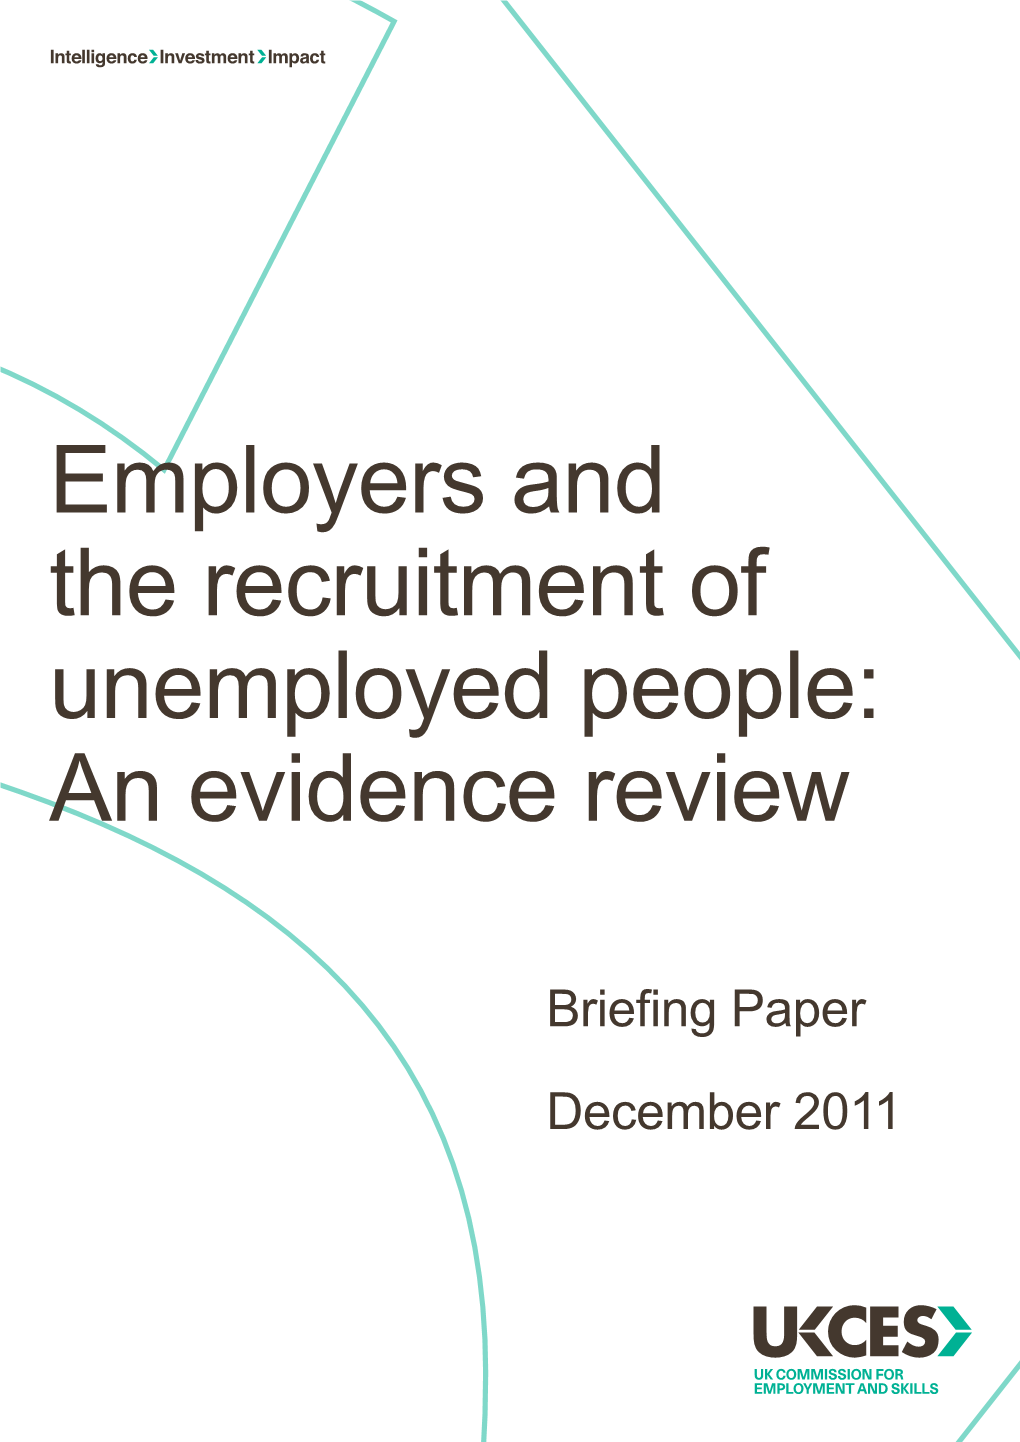 Employers and the Recruitment of Unemployed People: an Evidence Review